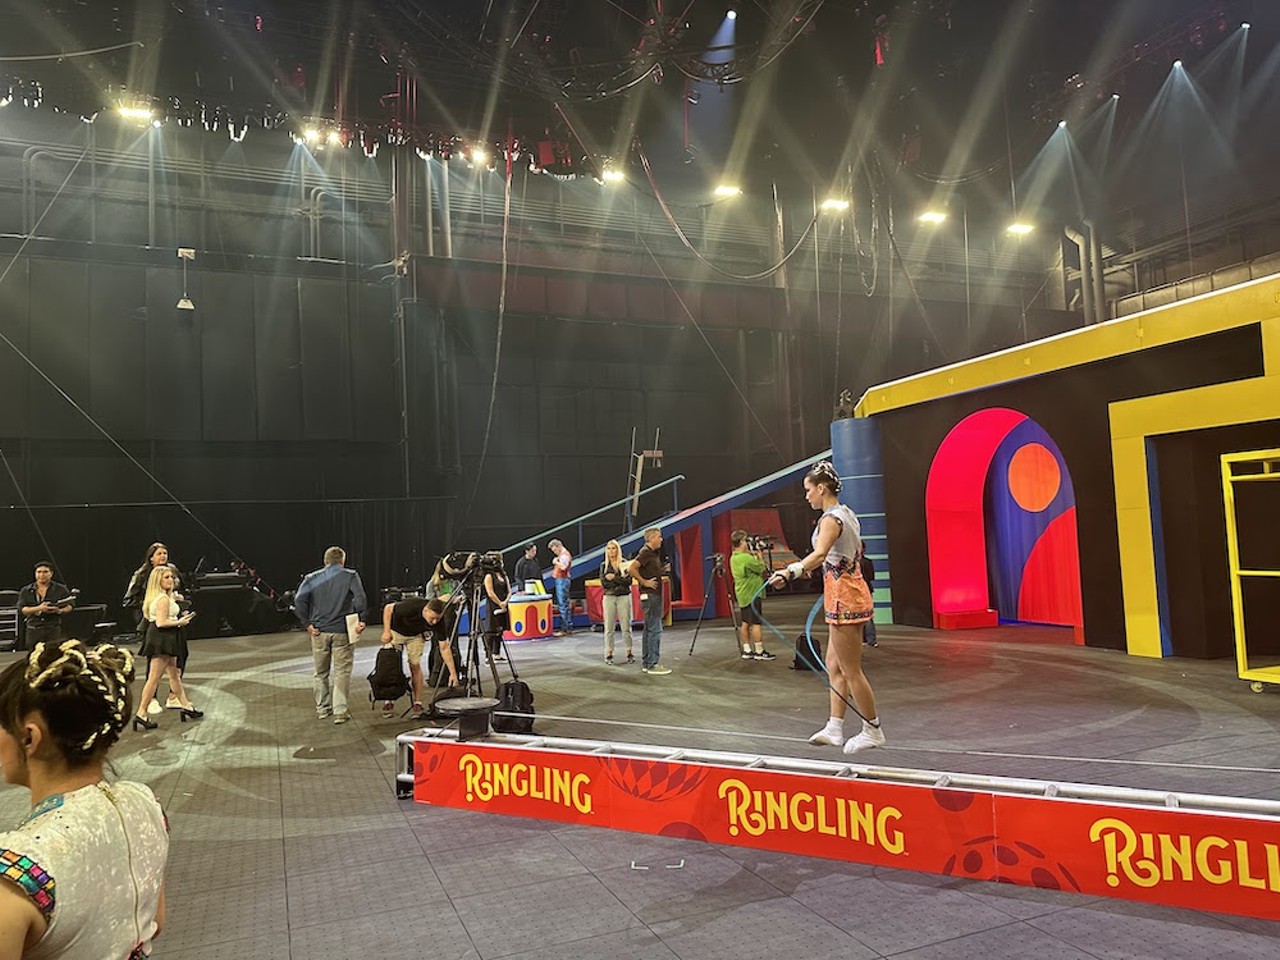 A slackline walker at the Feld Entertainment preview of the new Ringling Bros. Barnum & Bailey Circus.